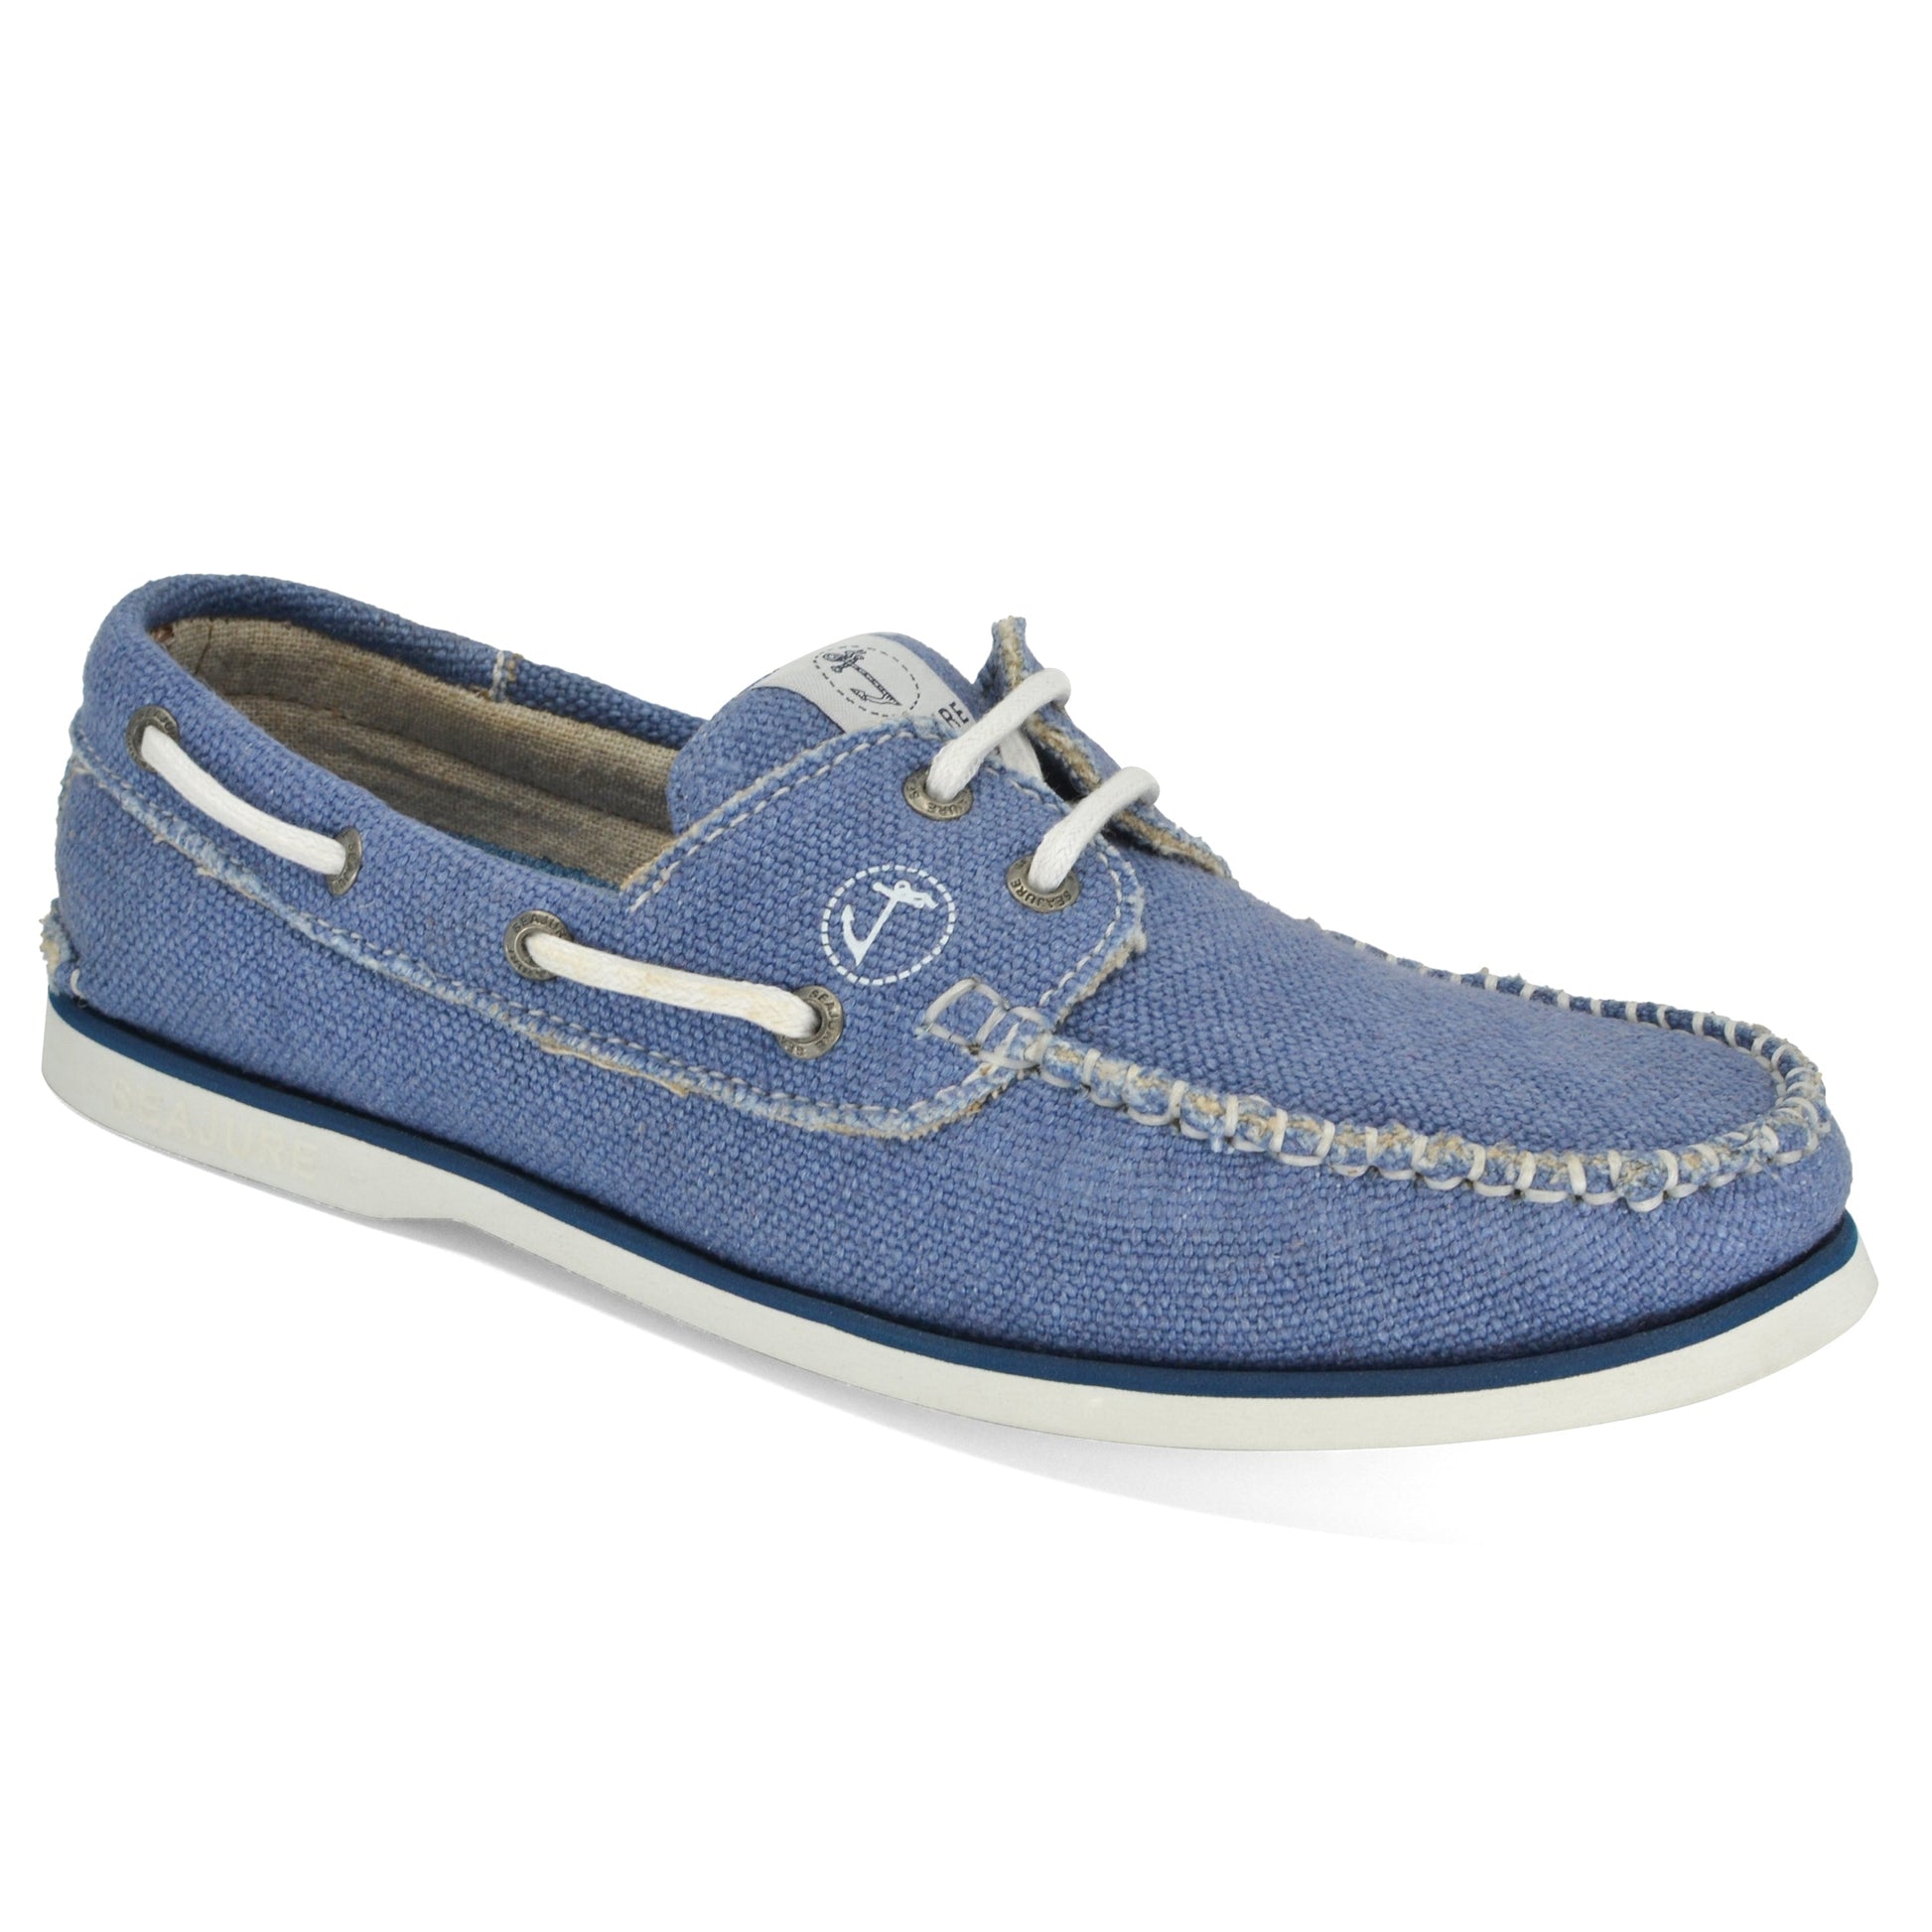 Men Hemp & Vegan Boat Shoe Fidden by Amethyst Hestia, with blue canvas and white stitching and laces, featuring a natural rubber sole and a logo on the tongue.